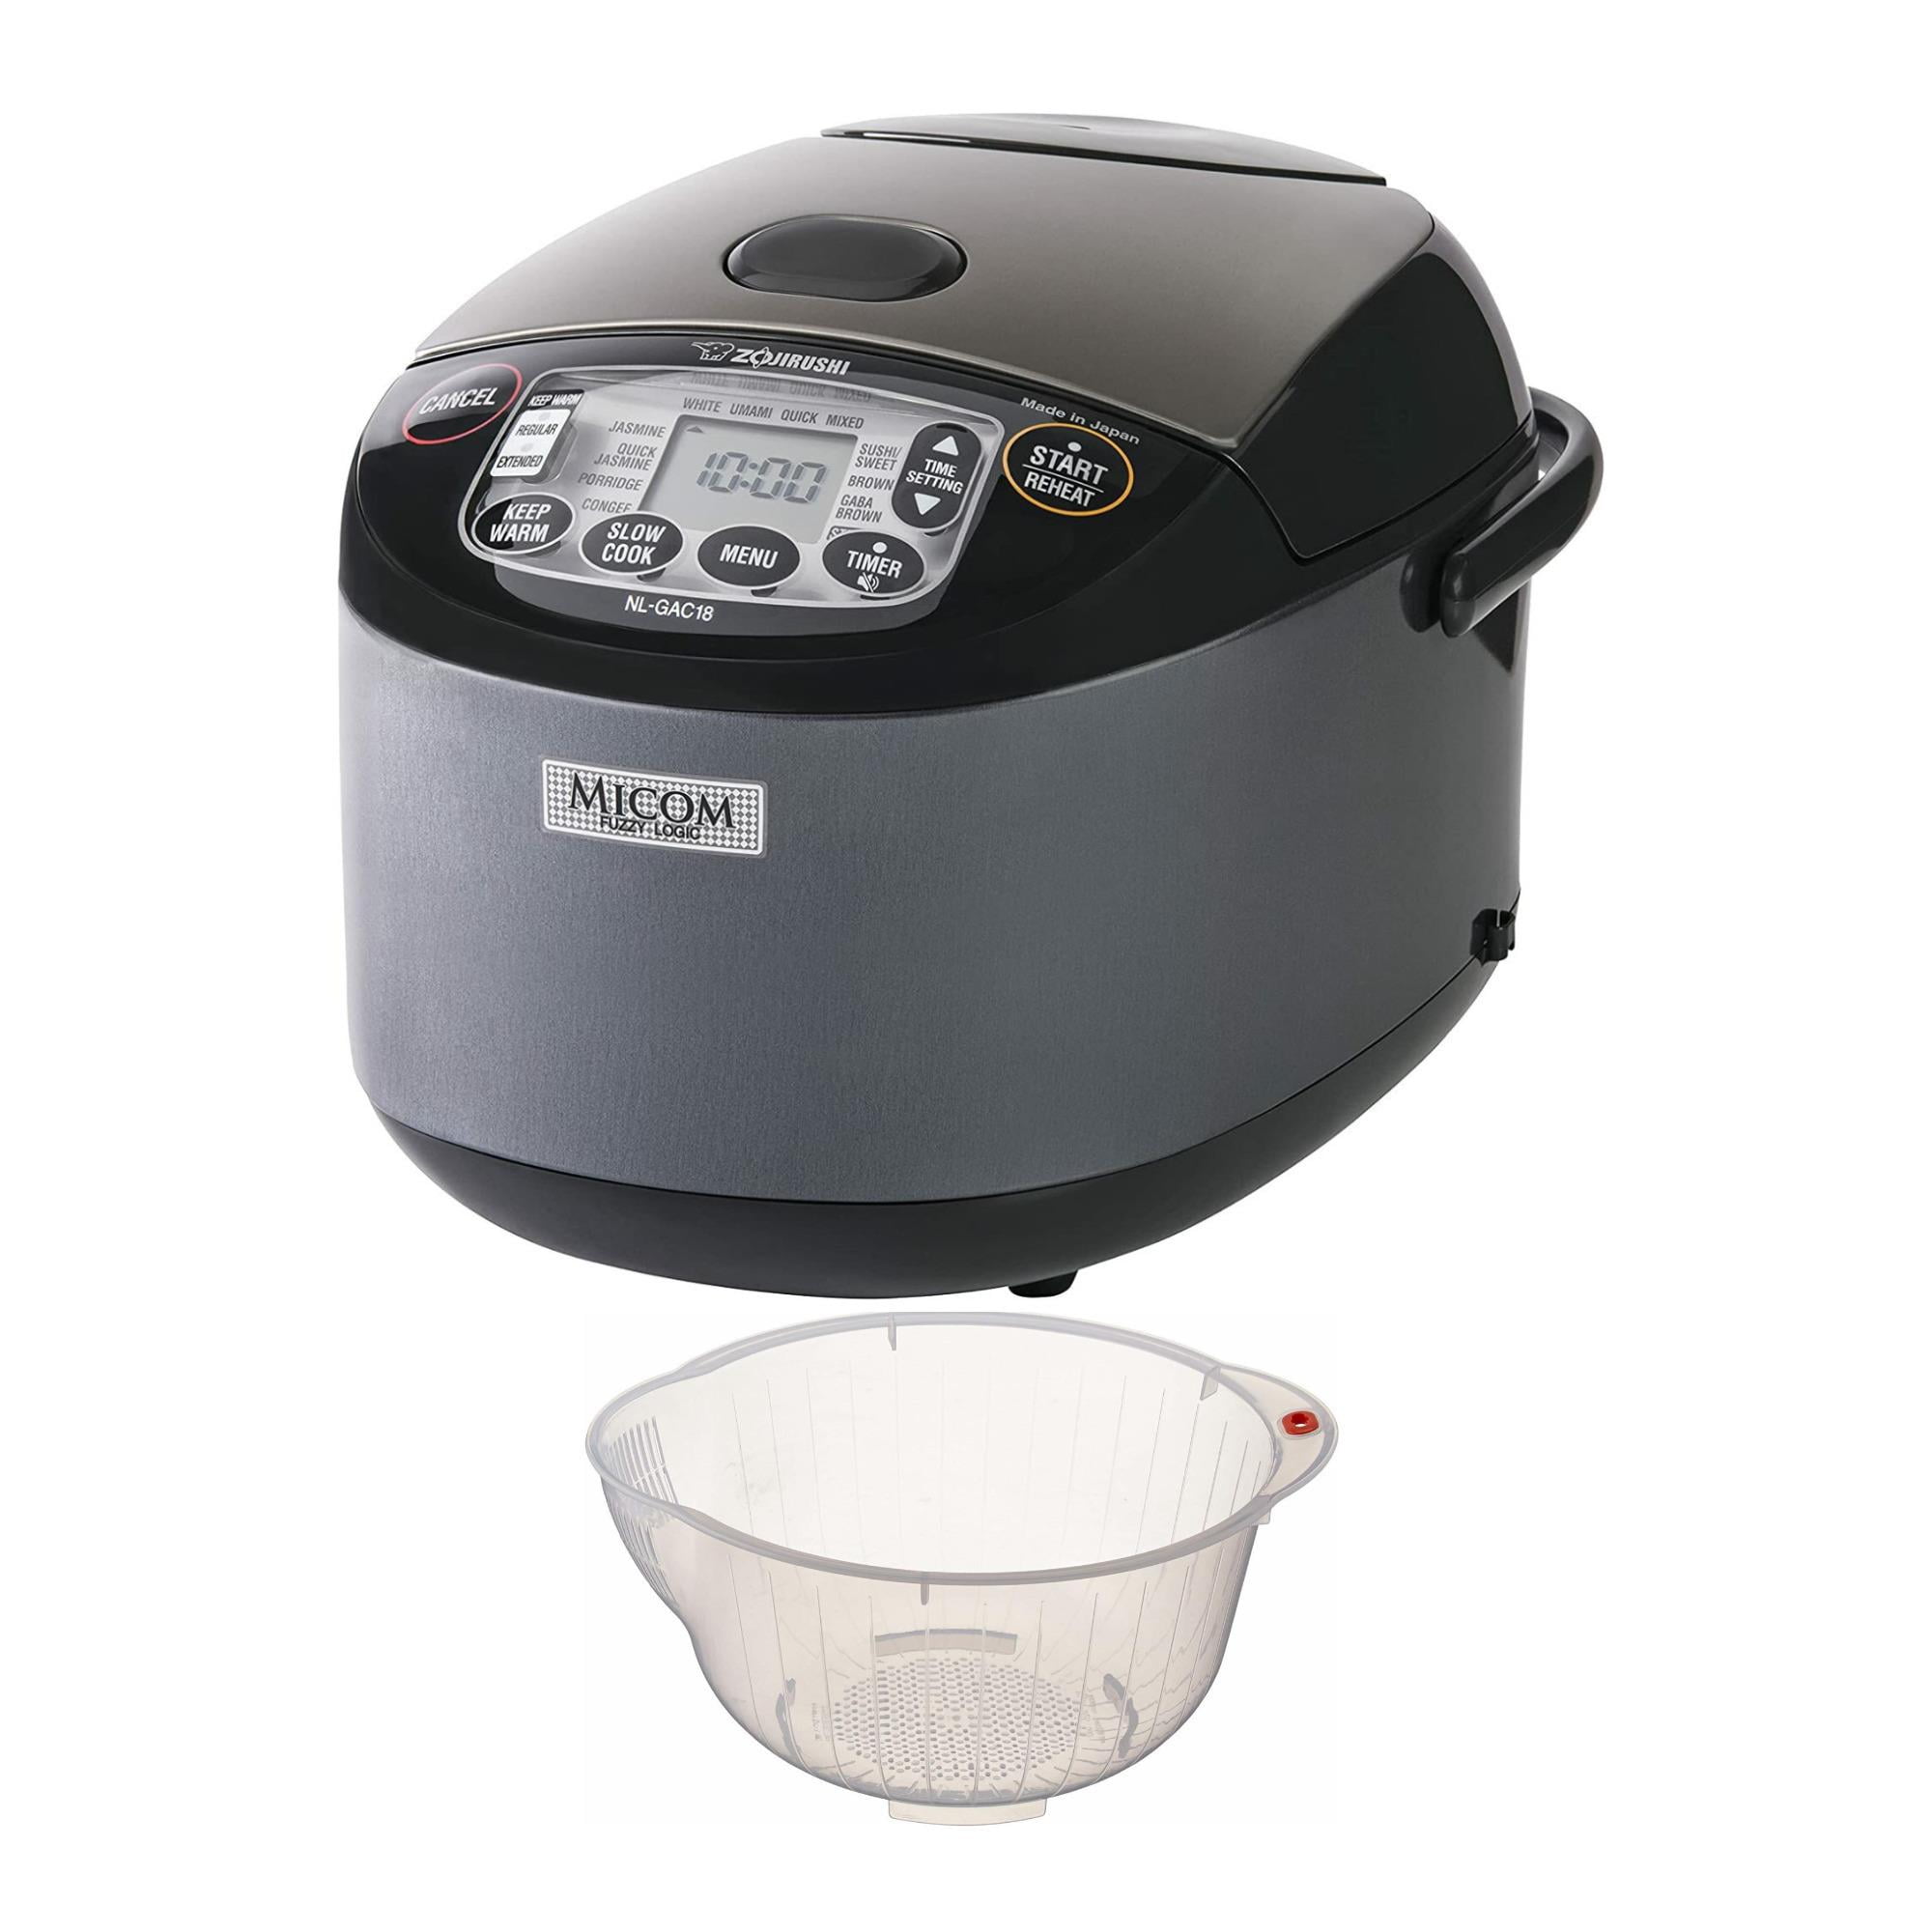 Rice Cooker Large Maker 10 Cup Uncooked 18 Functions, Japanese Style Fuzzy  Logic